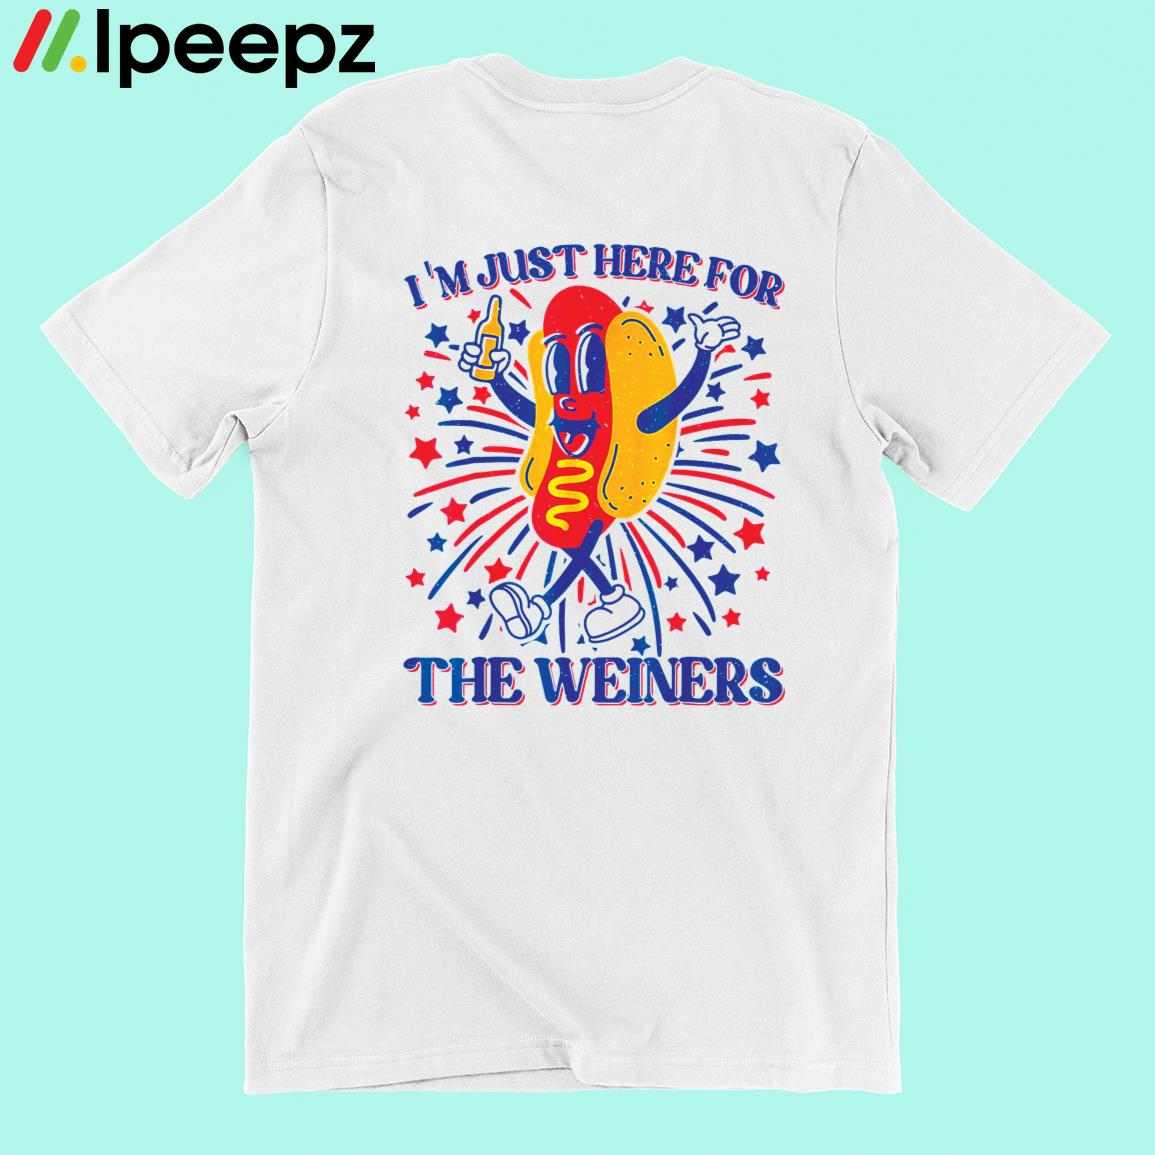 Ipeepz Hot Dog I'm Just Here for The Wieners 4th of July Shirt